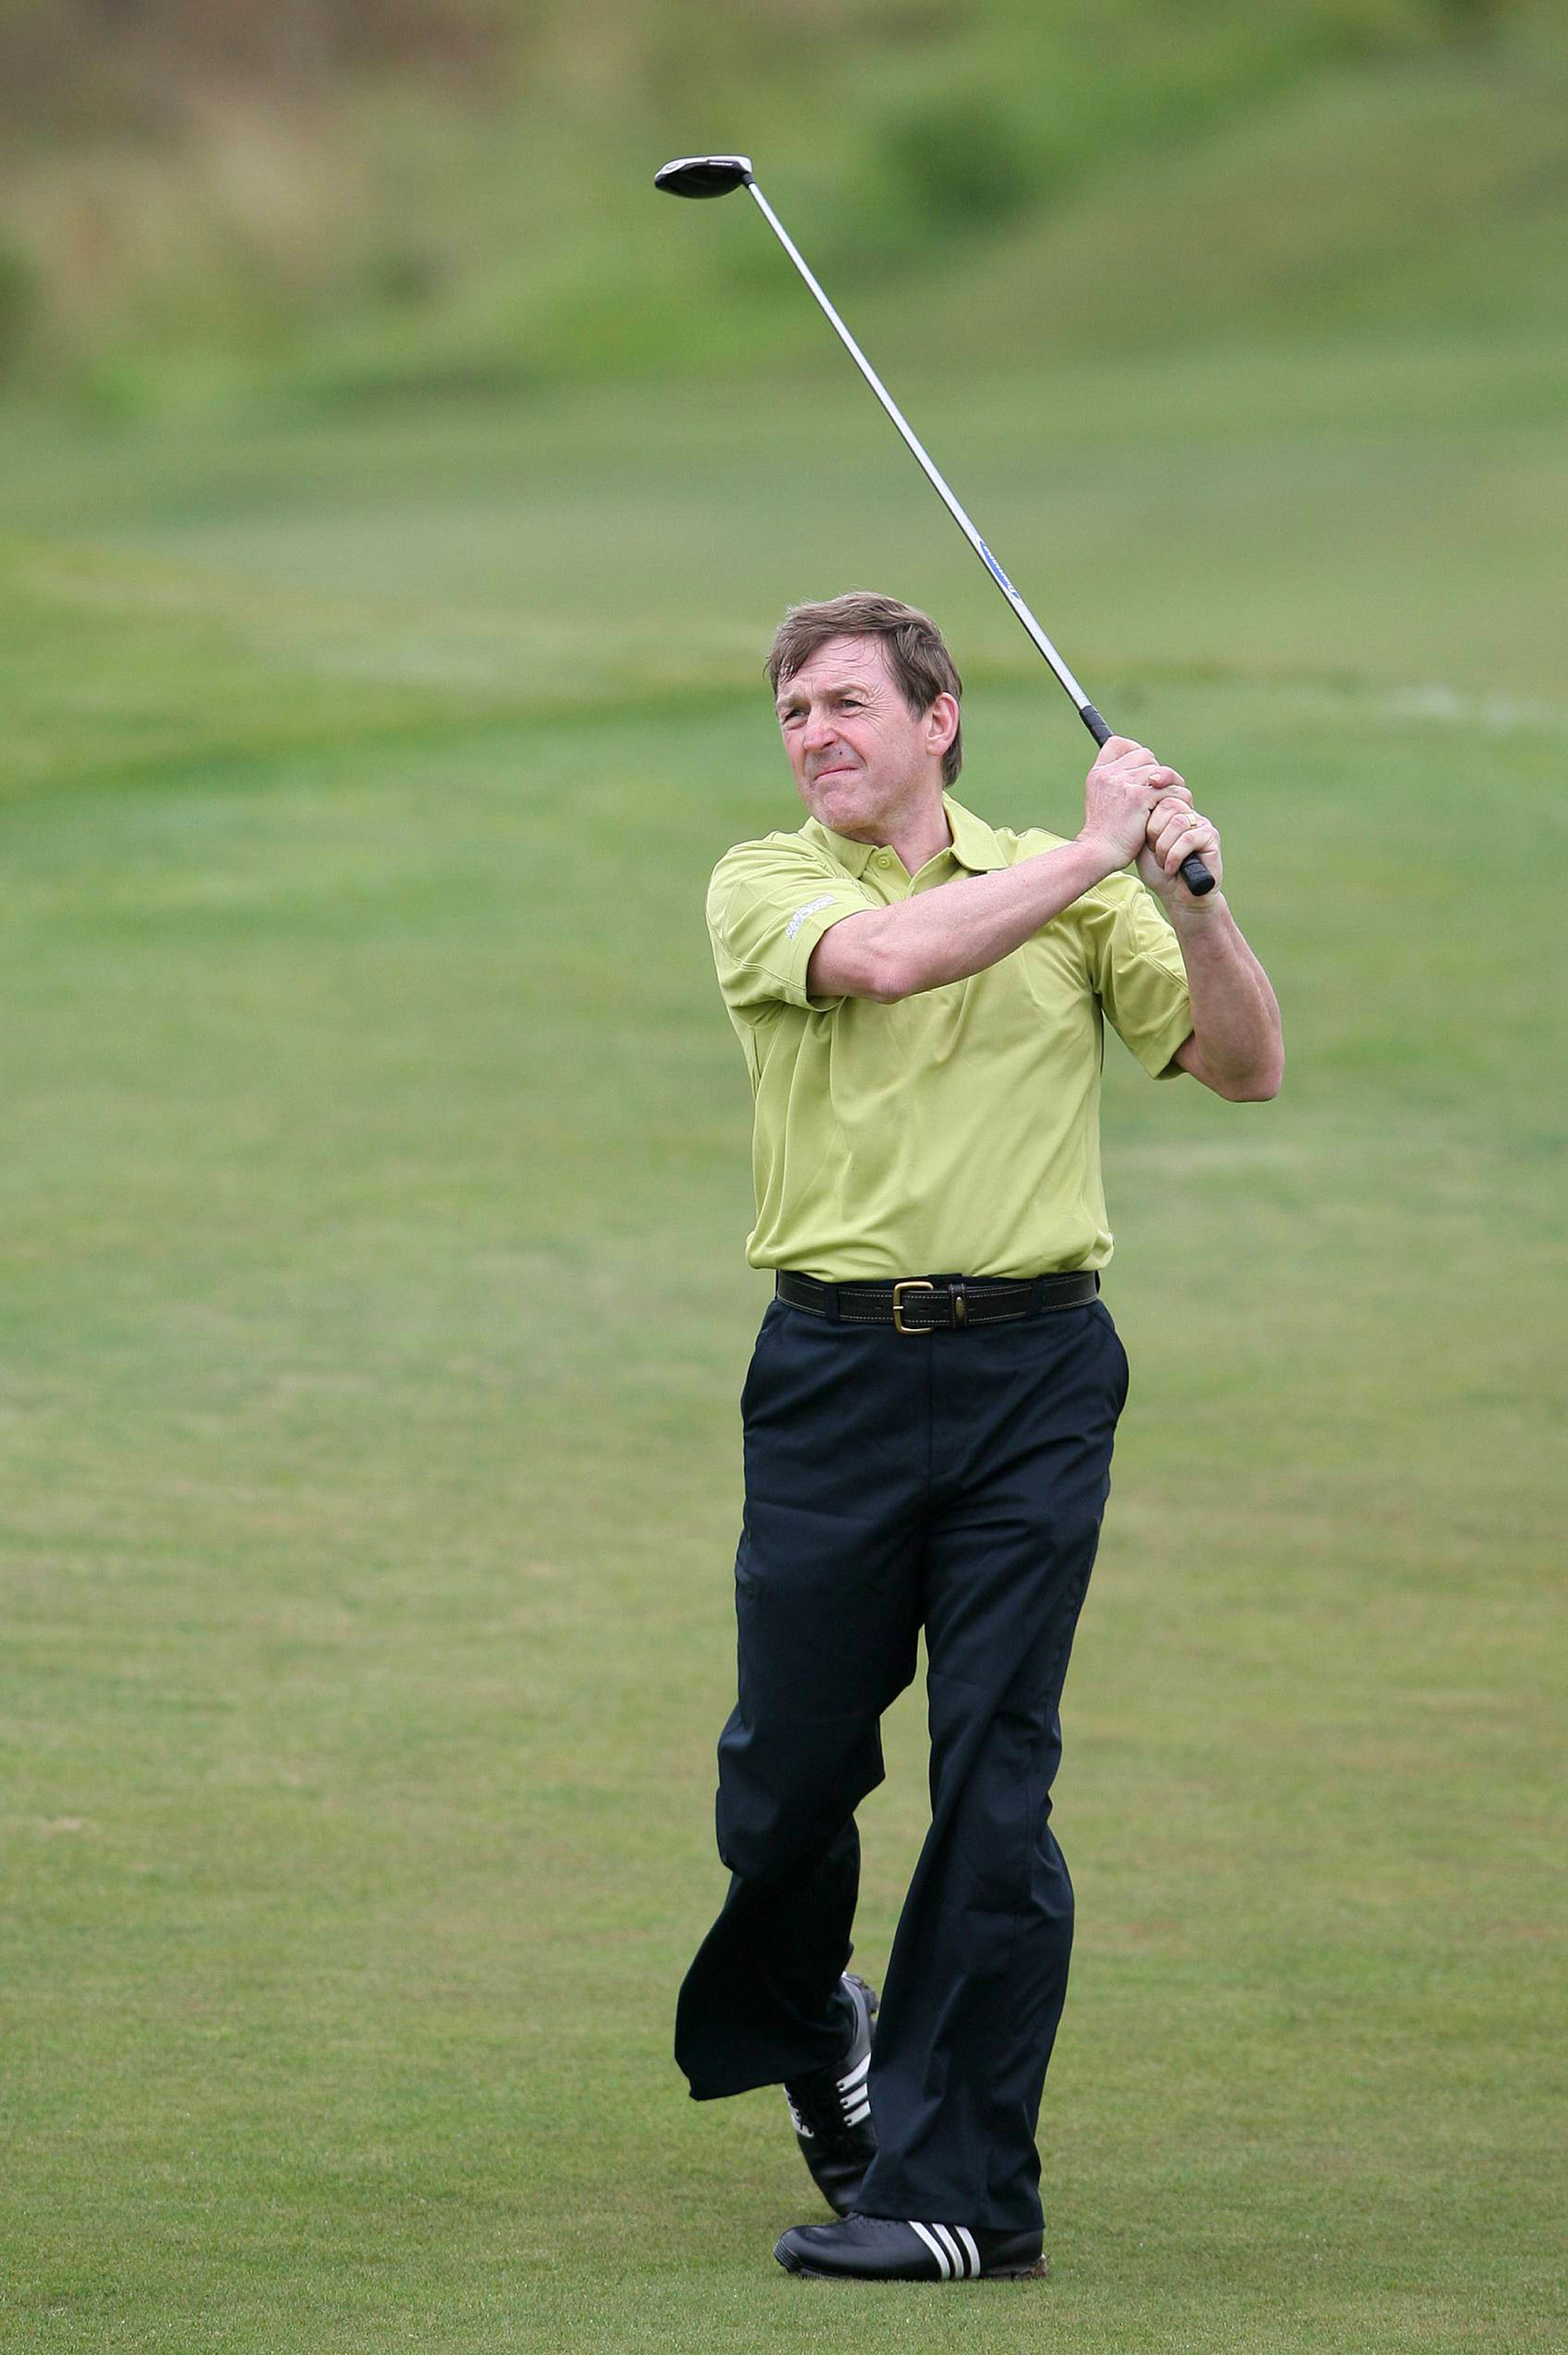 GEORGE, SOUTH AFRICA -  FEBRUARY 11:  Liverpool FC Academy Ambassador Kenny Dalglish of Scotland in action during day one of the Dimension Data Pro-Am at Fancourt on February 11, 2010 in George, South Africa.  (Photo by Carl Fourie/Sunshine Tour/Gallo Ima